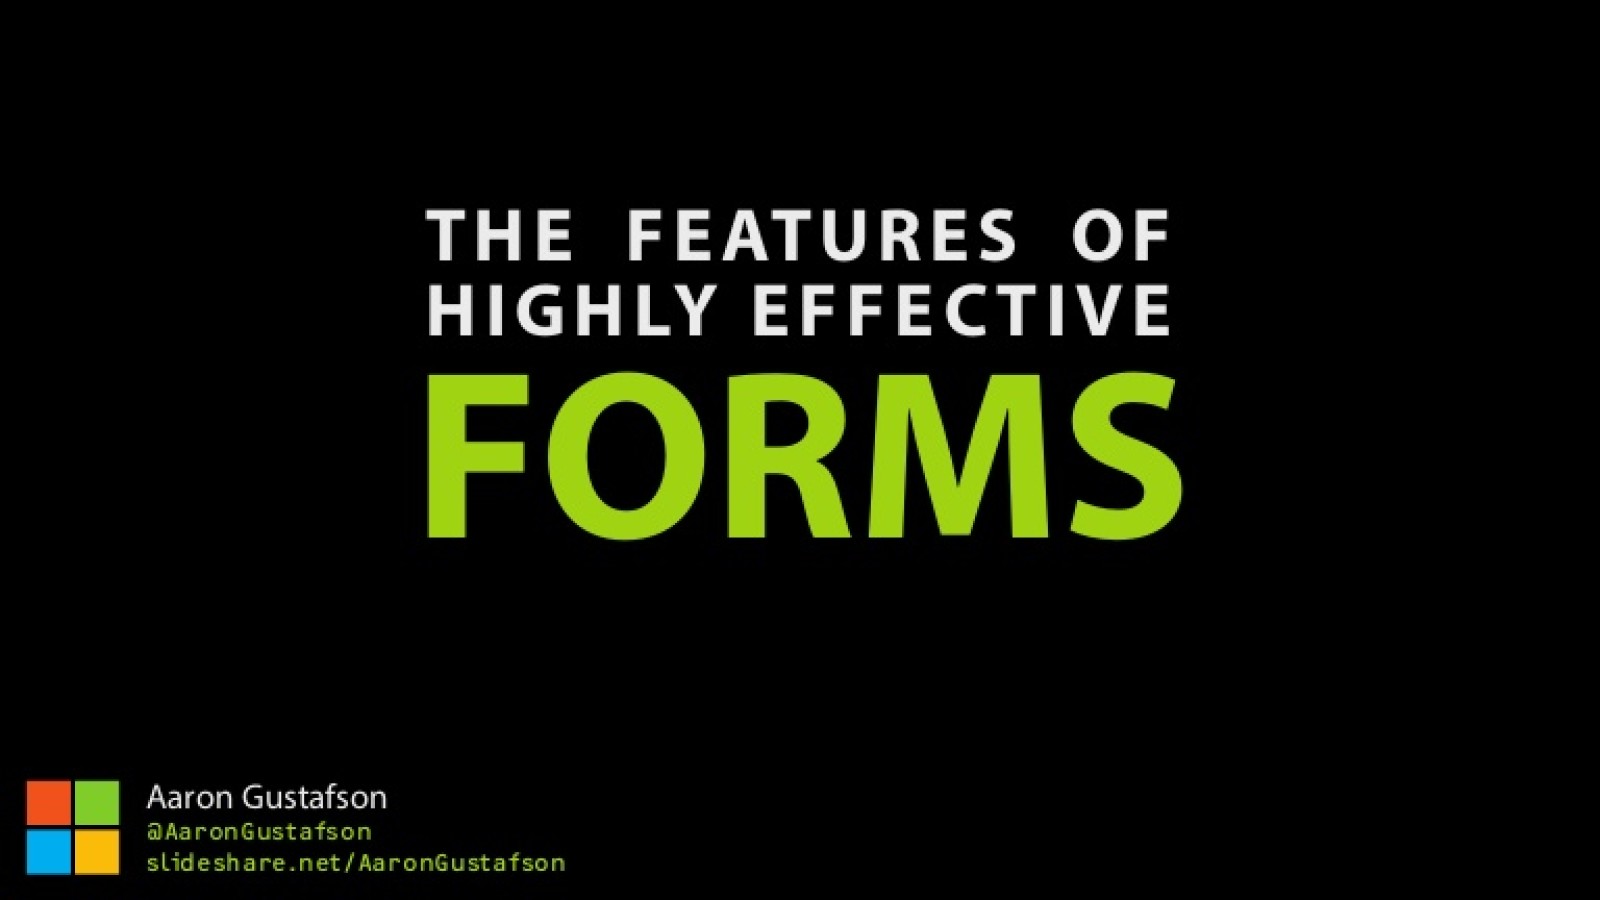 The Features of Highly Effective Forms